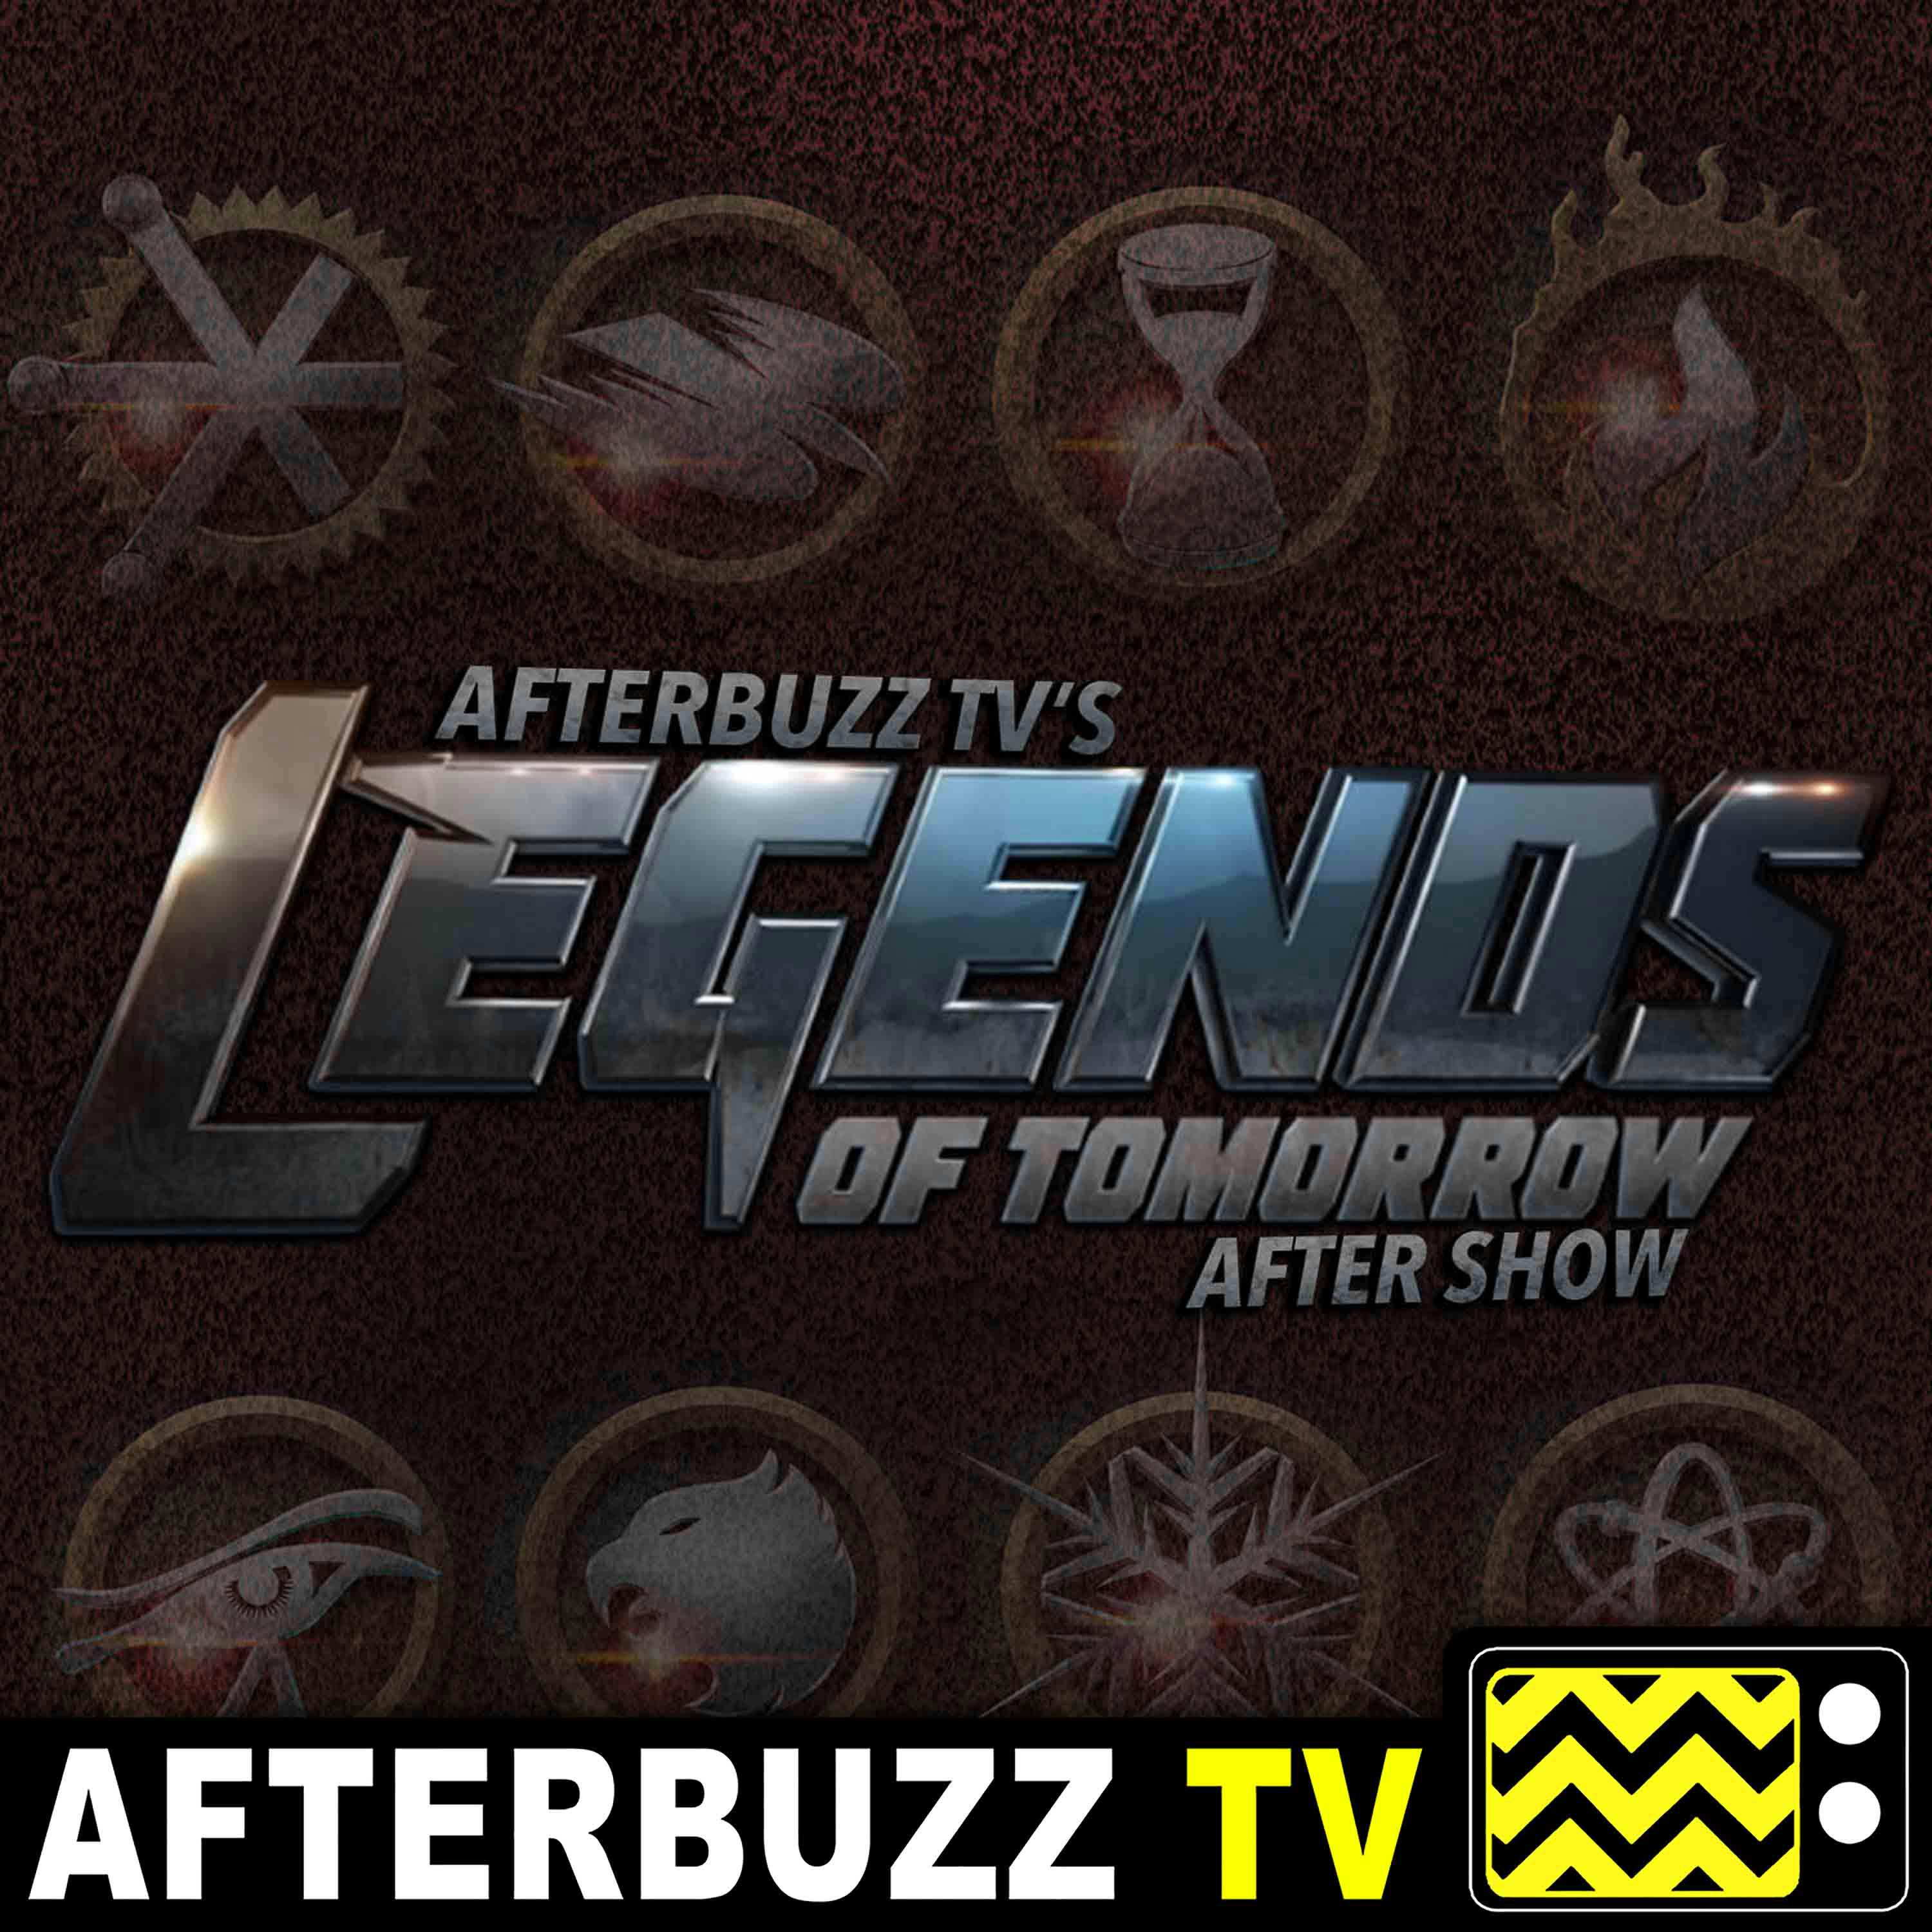 Legends Of Tomorrow S5 E13 Recap & After Show: Legends Of Tomorrow S5 E13 Recap & After Show: “Zombies. Why did it have to be Zombies?”